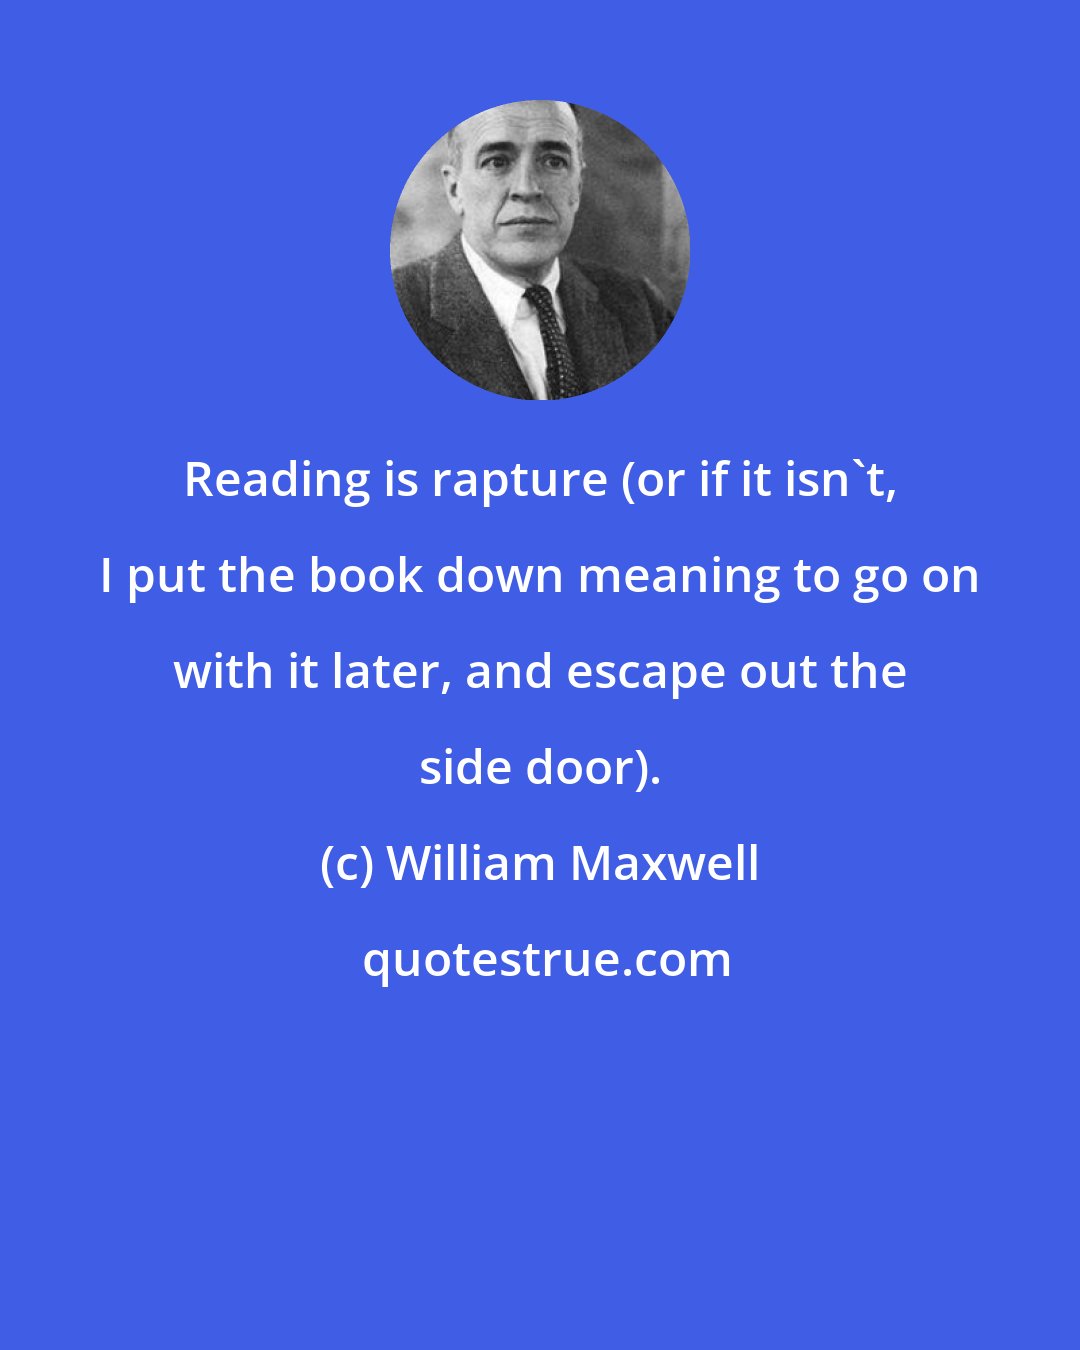 William Maxwell: Reading is rapture (or if it isn't, I put the book down meaning to go on with it later, and escape out the side door).